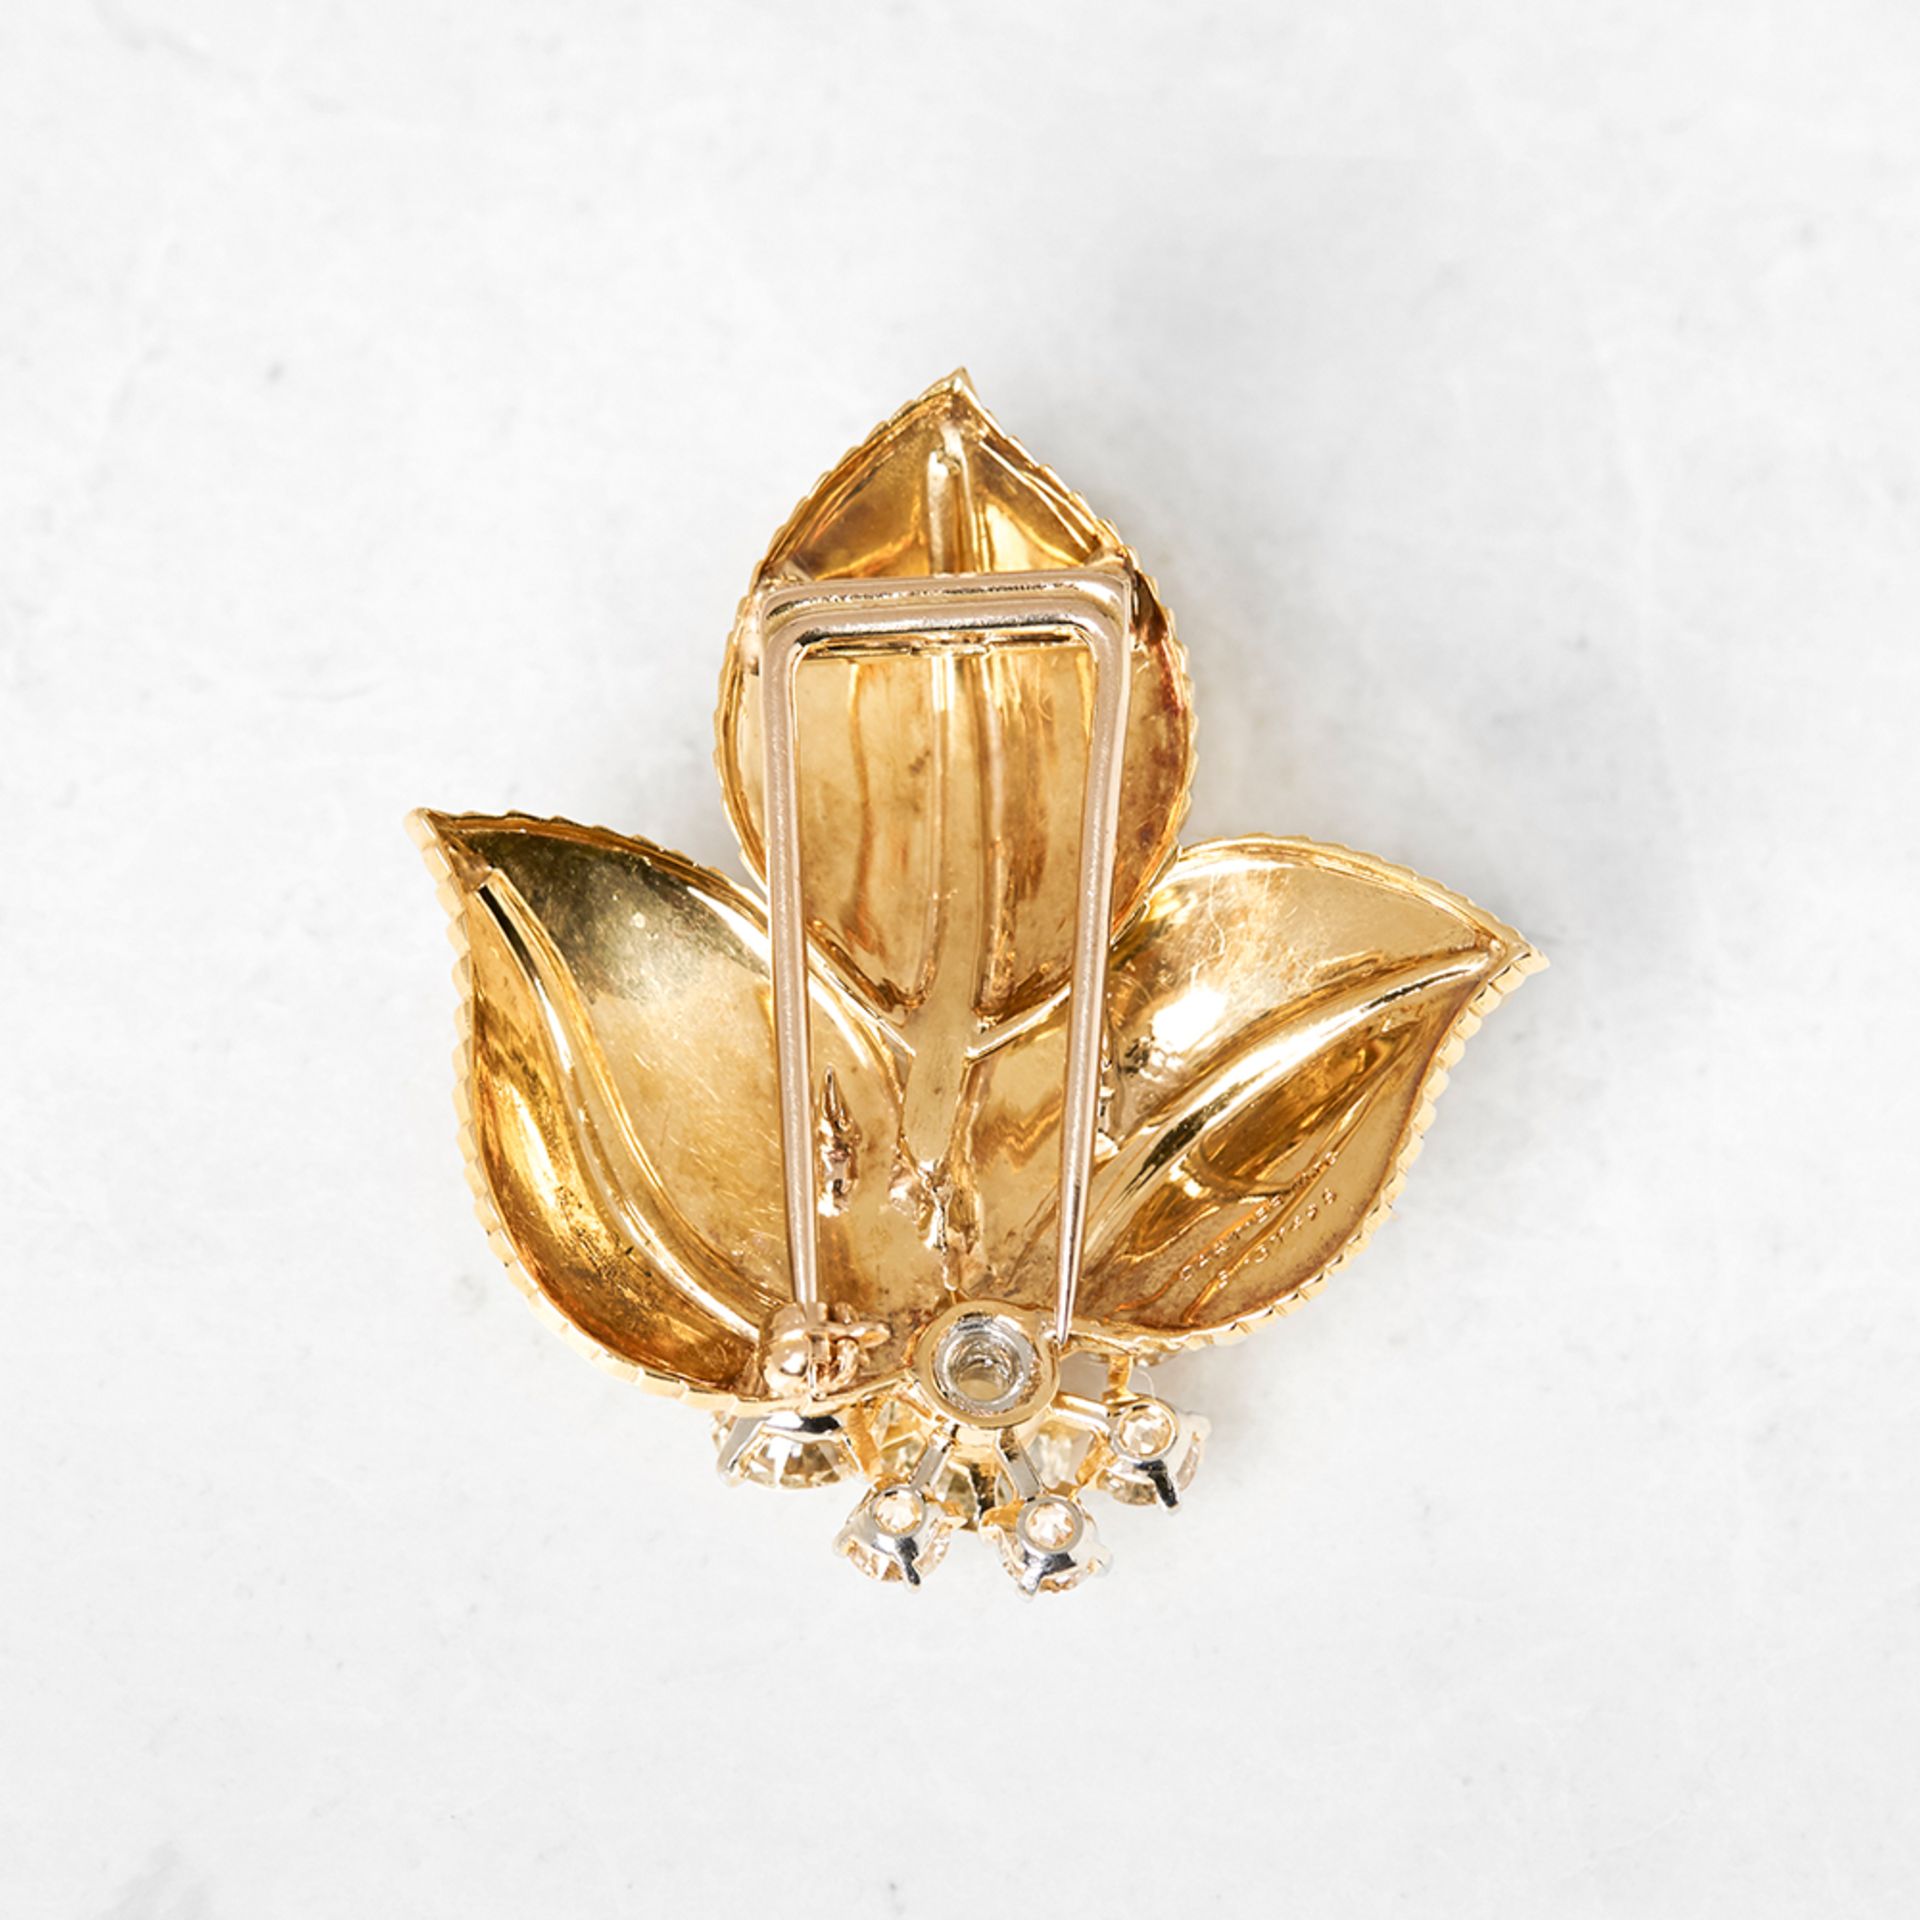 Cartier 18k Yellow Gold Diamond Vintage Leaf Brooch with Presentation Box - Image 9 of 16